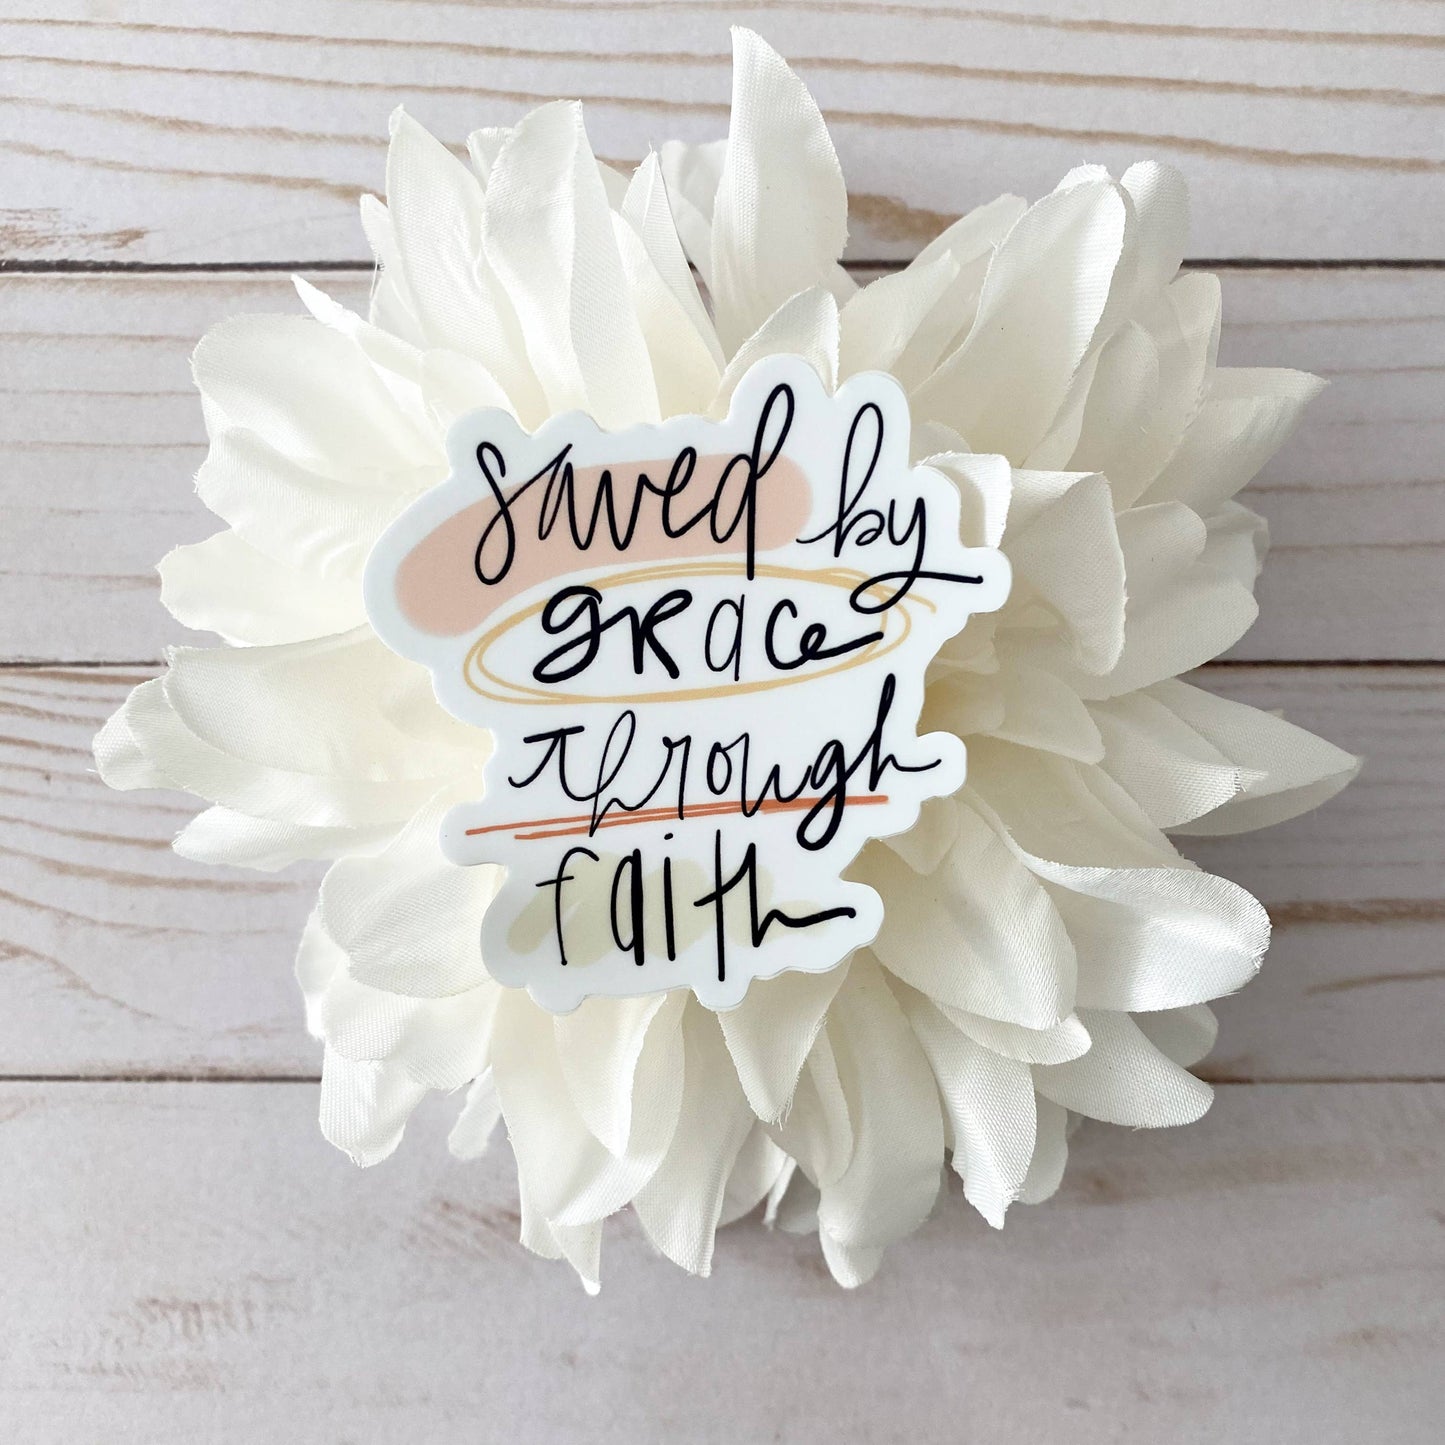 Saved By Grace Through Faith Sticker *FREE SHIPPING with any order over $10